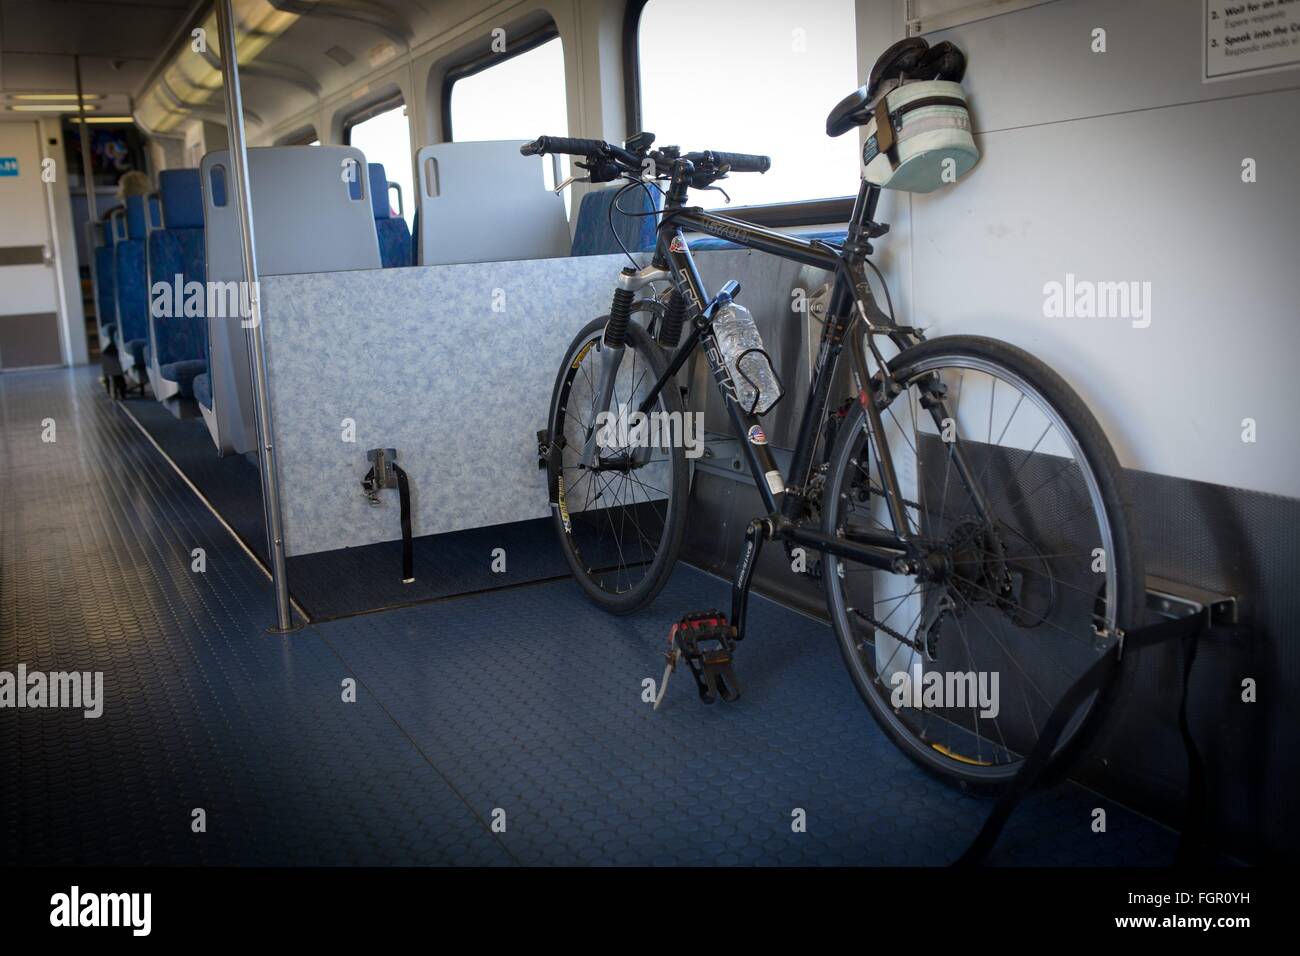 Fahrrad Zug High Resolution Stock Photography and Images - Alamy